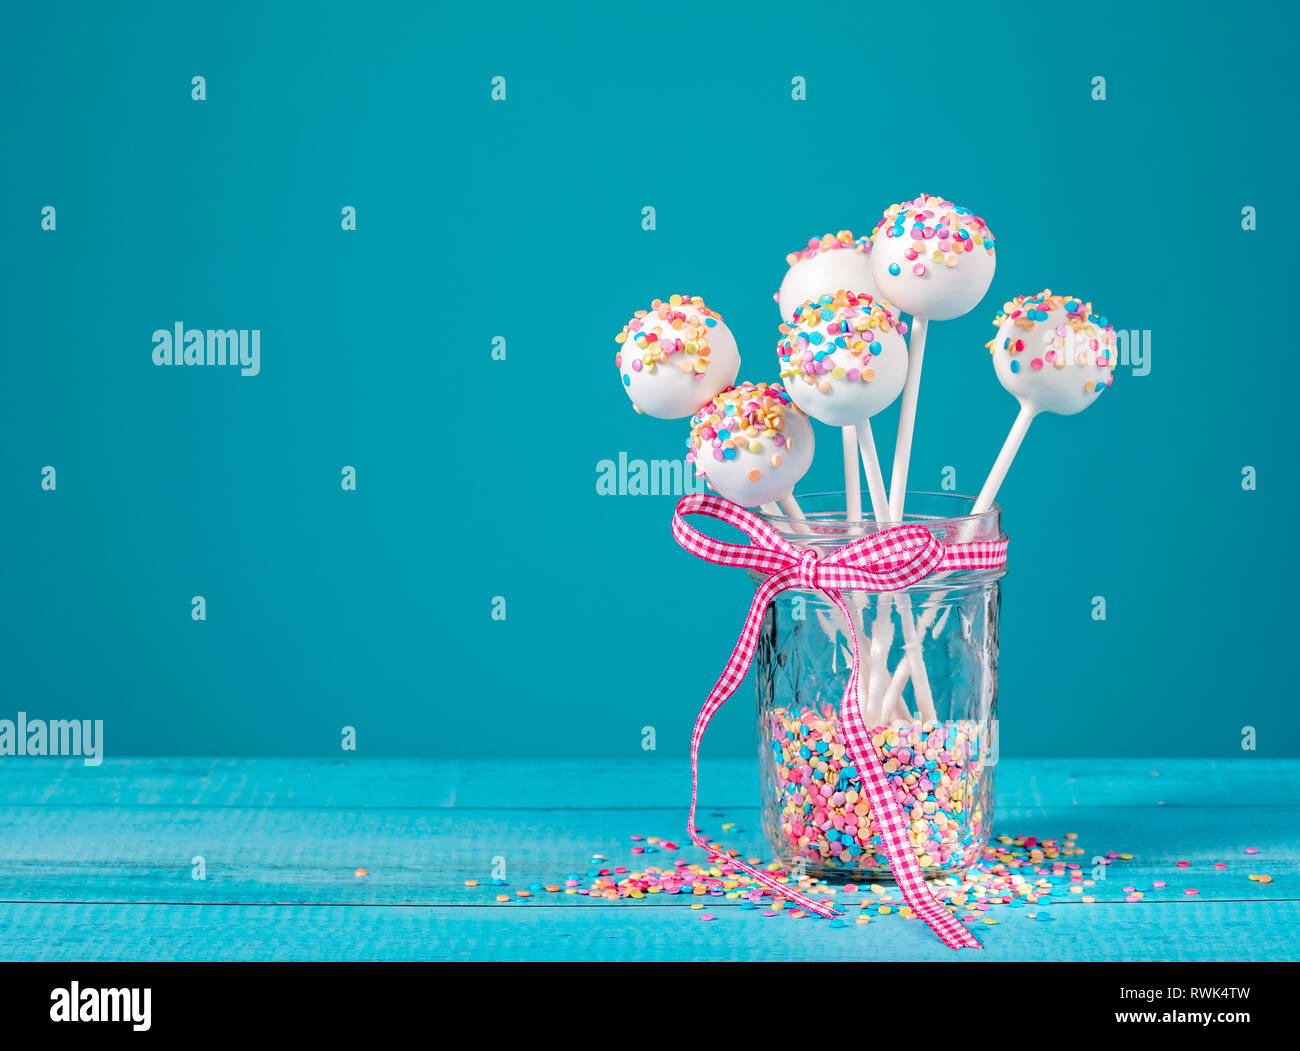 Vanilla cake pops with colorful sprinkles in a cute jar over a blue background. Stock Photo